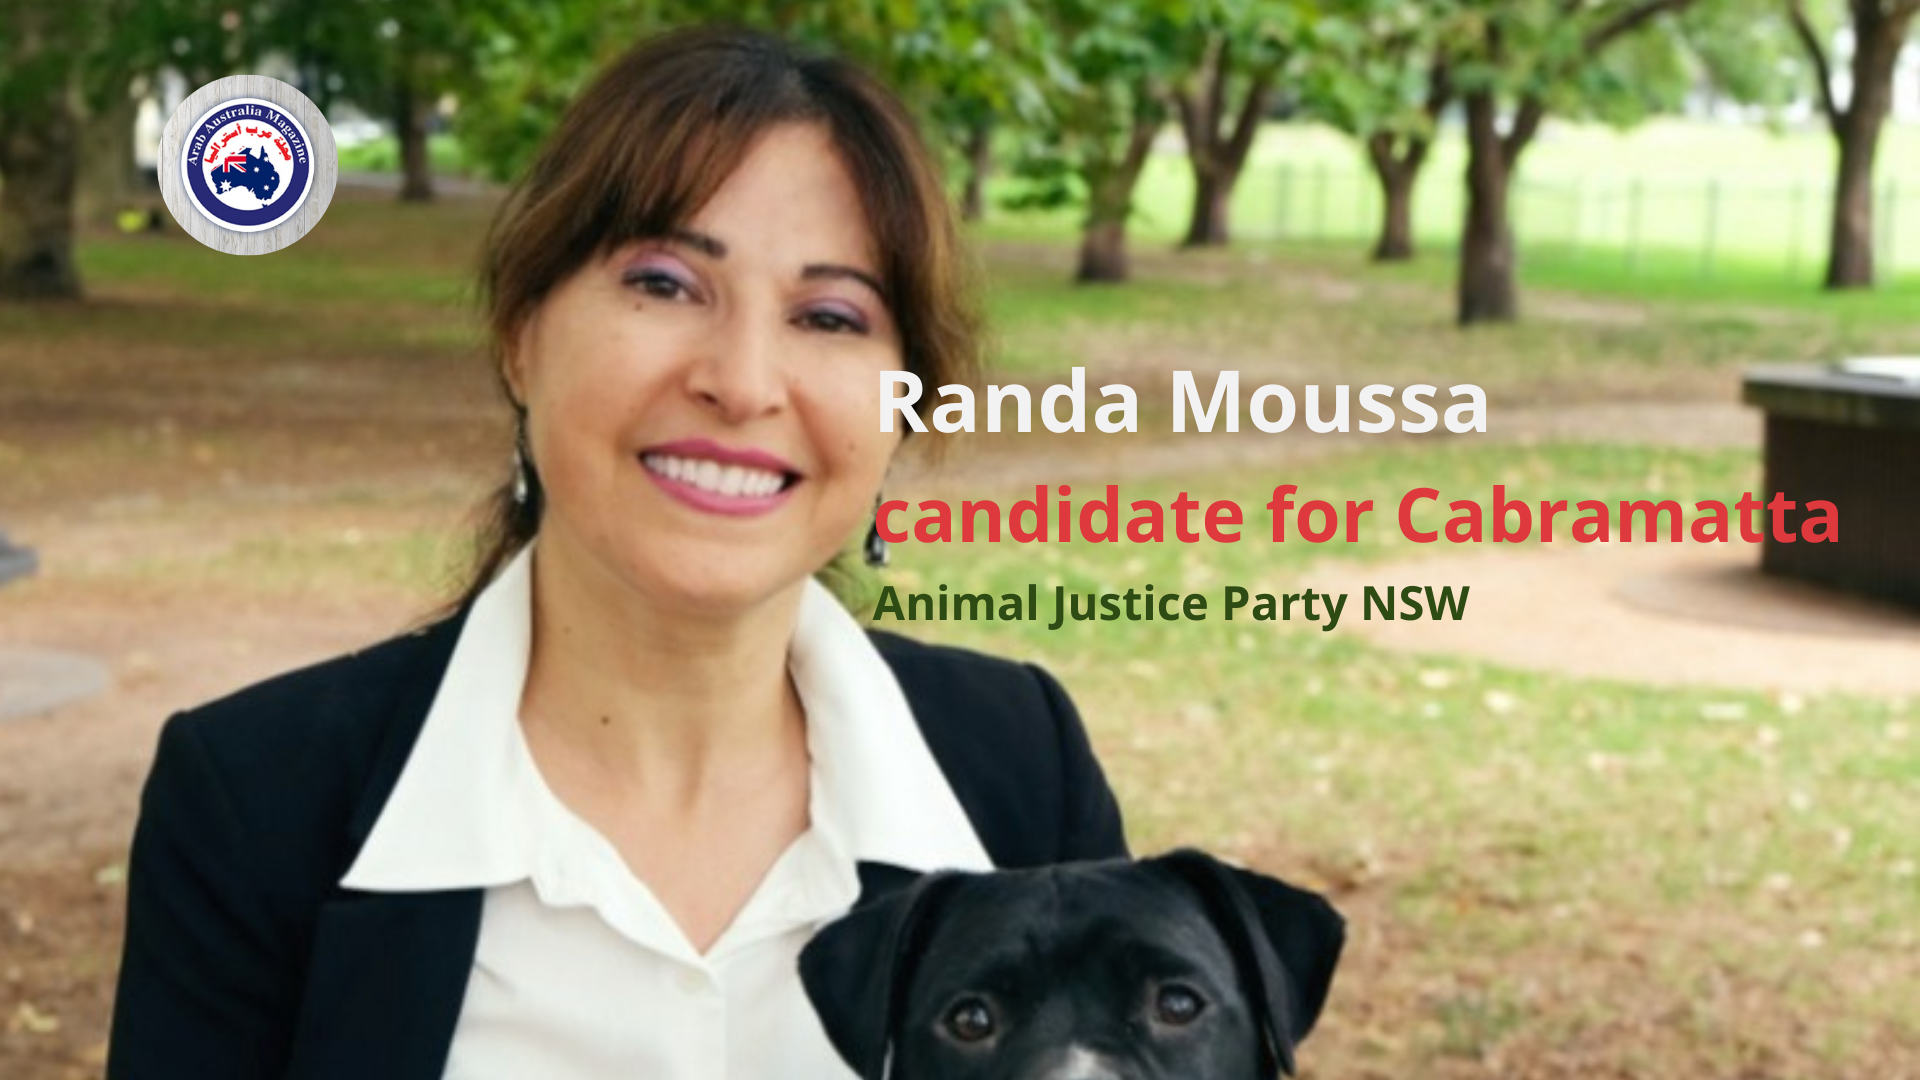 Randa Moussa – candidate for Cabramatta Animal Justice Party NSW